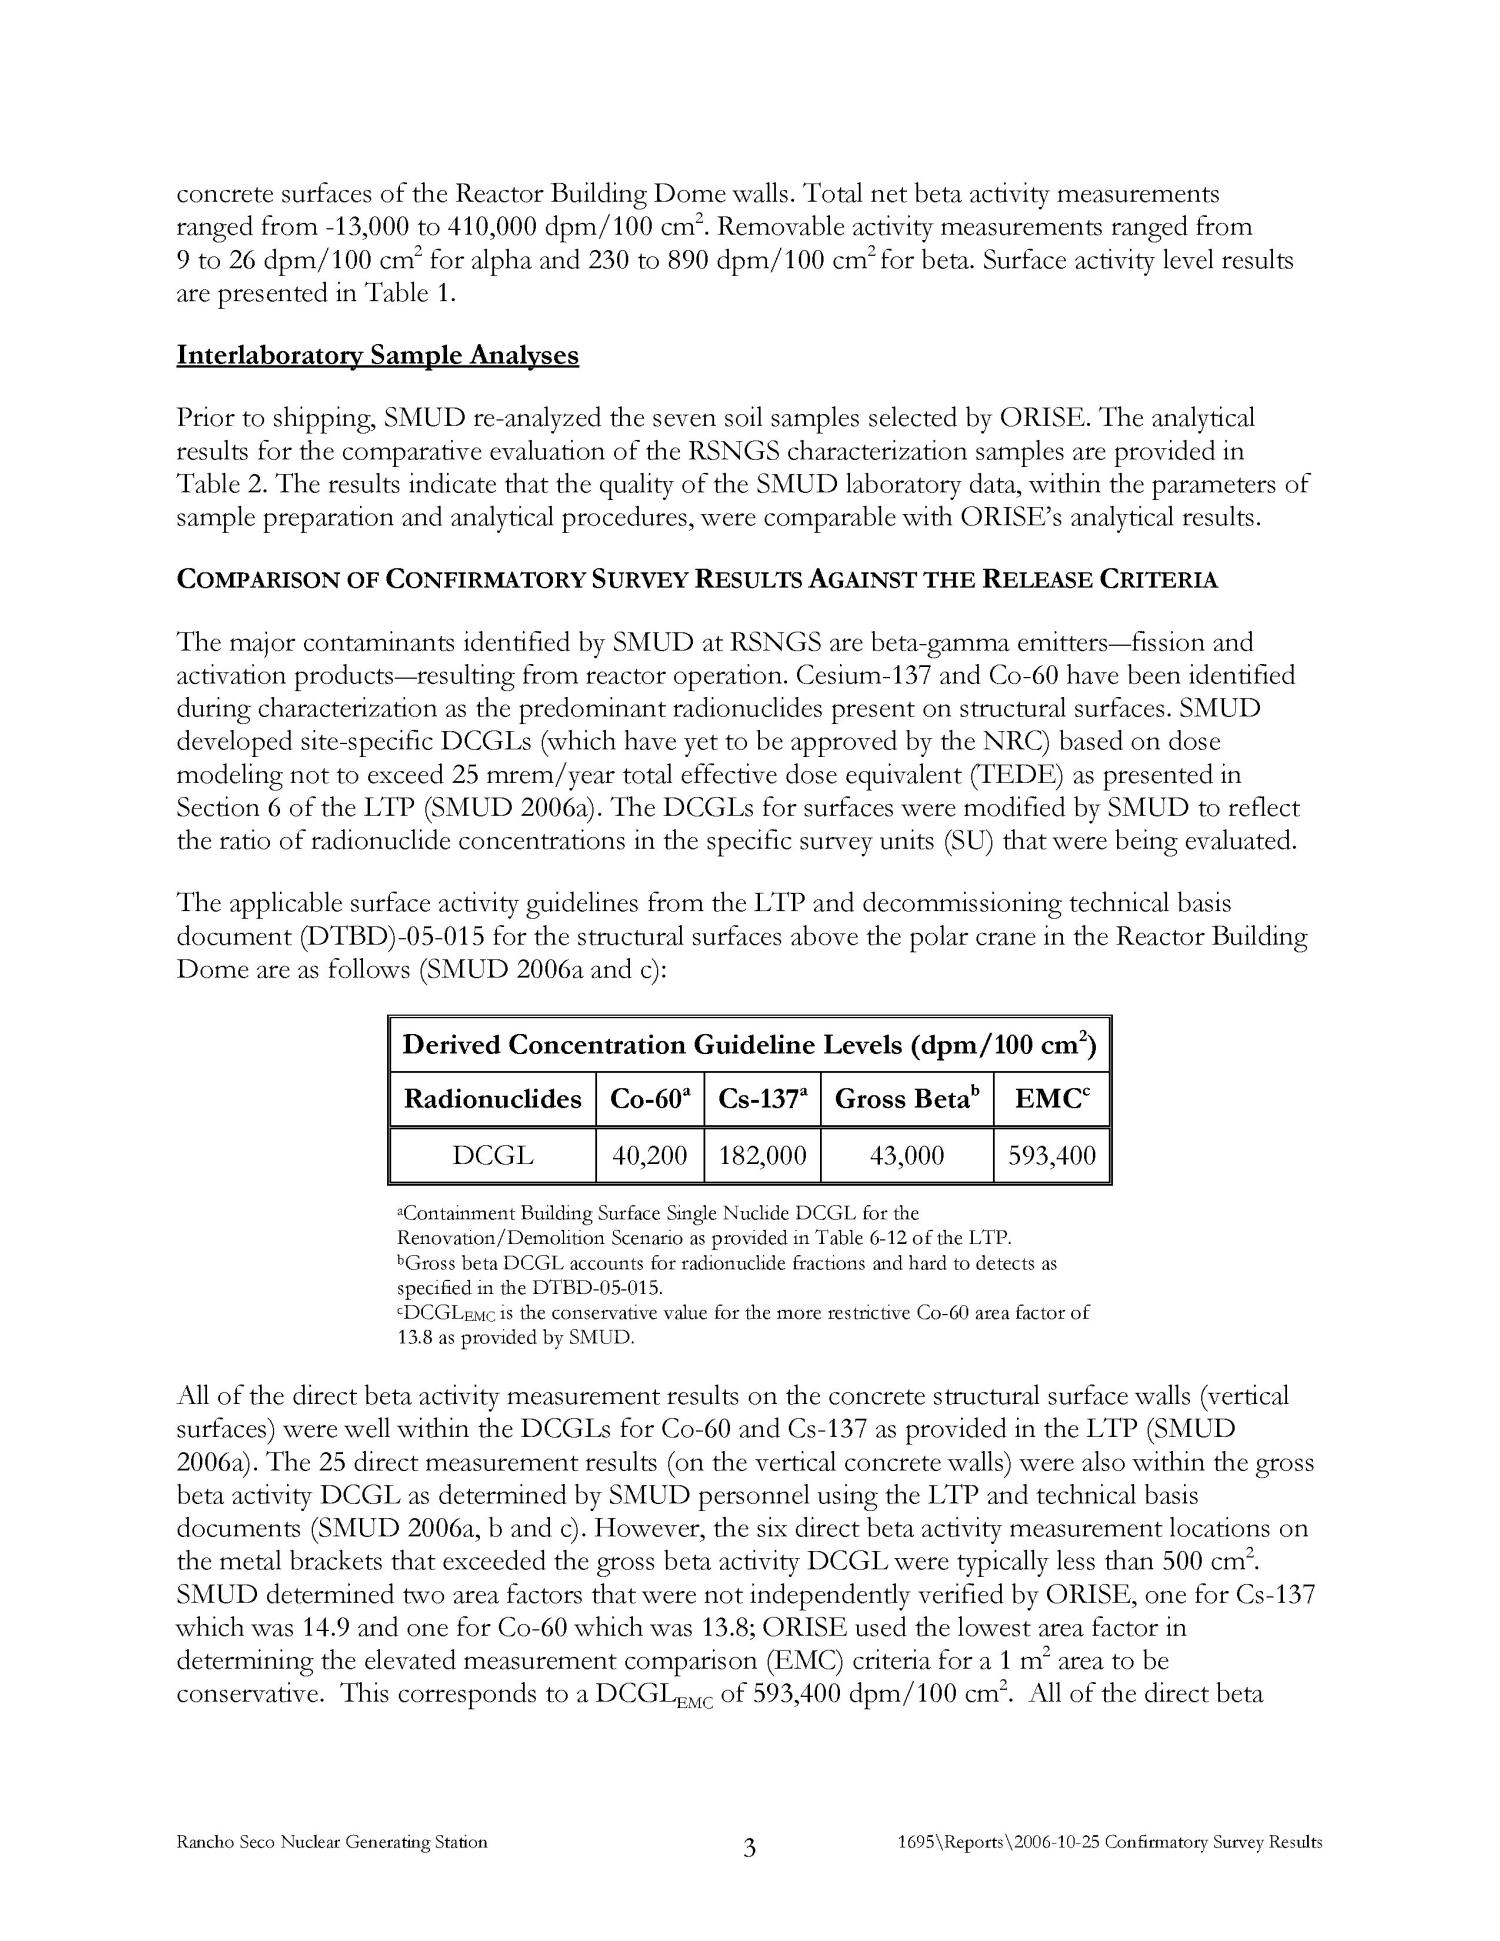 Confirmatory Survey Results for the Reactor Building Dome Upper Surfaces, Rancho Saco Nuclear Generating Station
                                                
                                                    [Sequence #]: 4 of 17
                                                